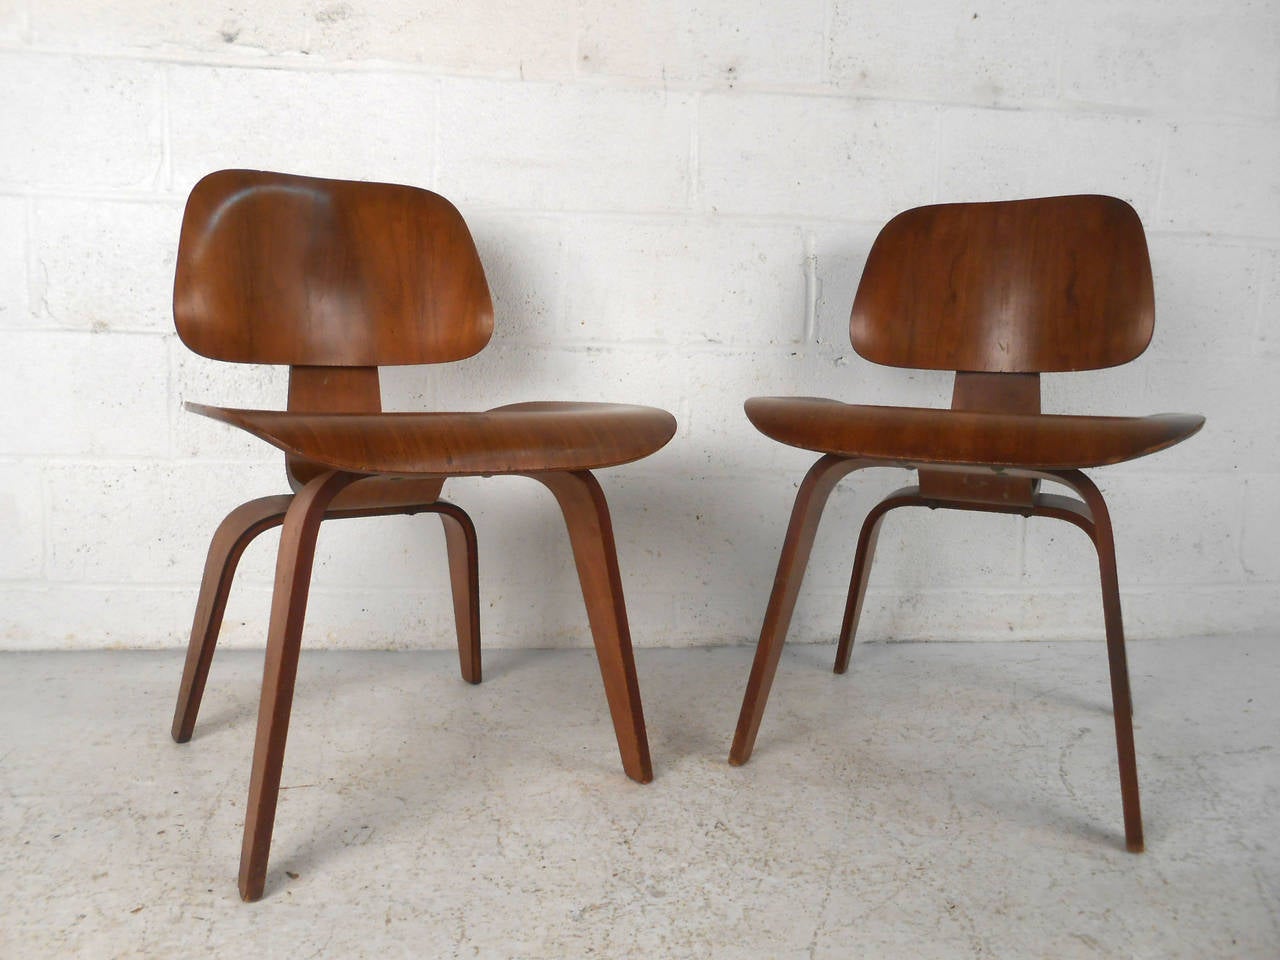 This beautiful matching pair of walnut side chairs designed by Charles and Ray Eames feature the unique molded ply design they were so well known for. Rubber spacers in the back rest and the remnants of an original label featuring the logos of both